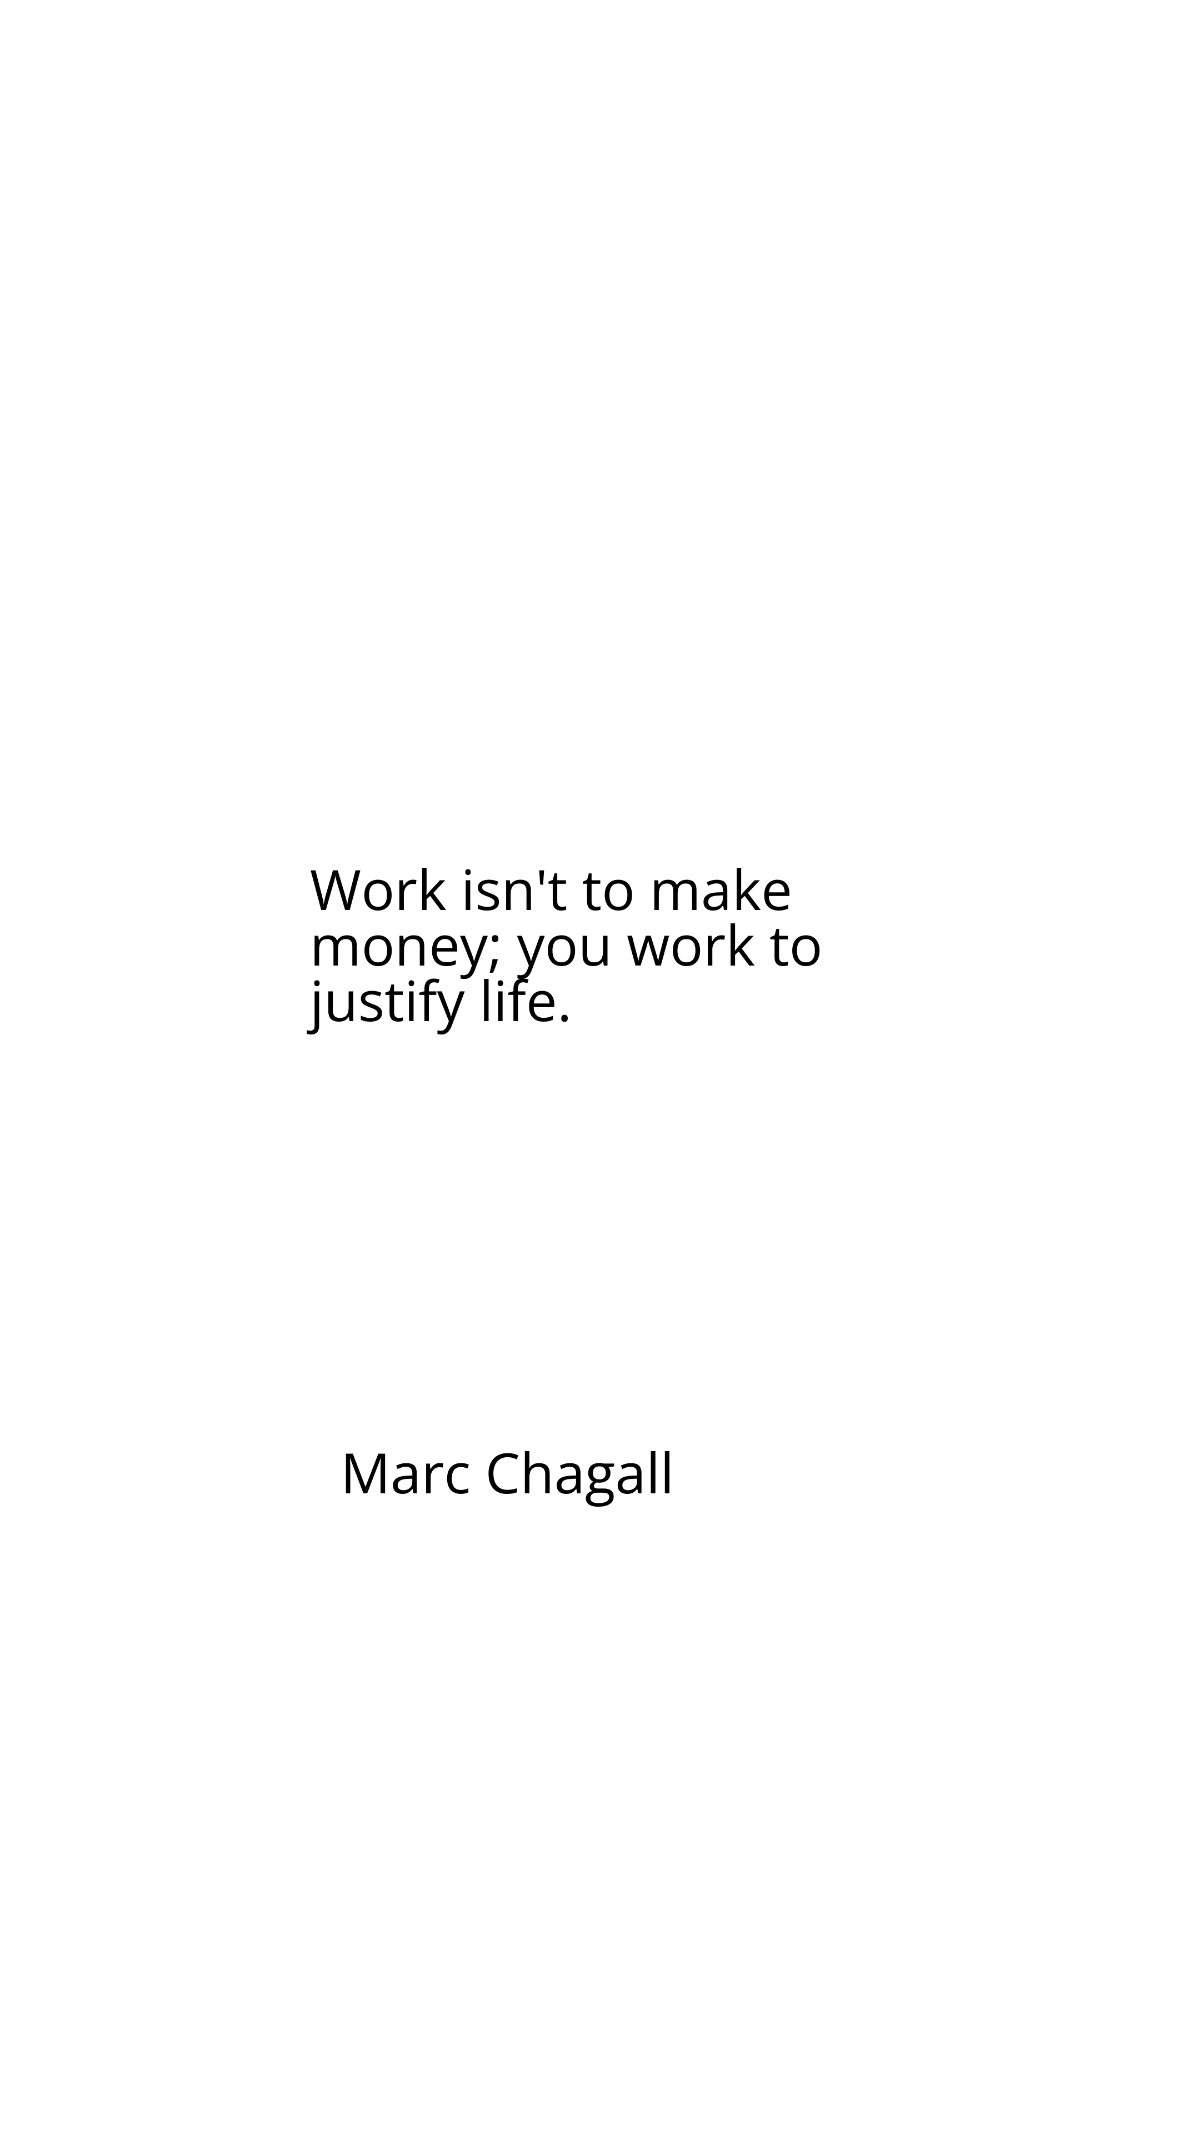 Marc Chagall - Work isn't to make money; you work to justify life. Template